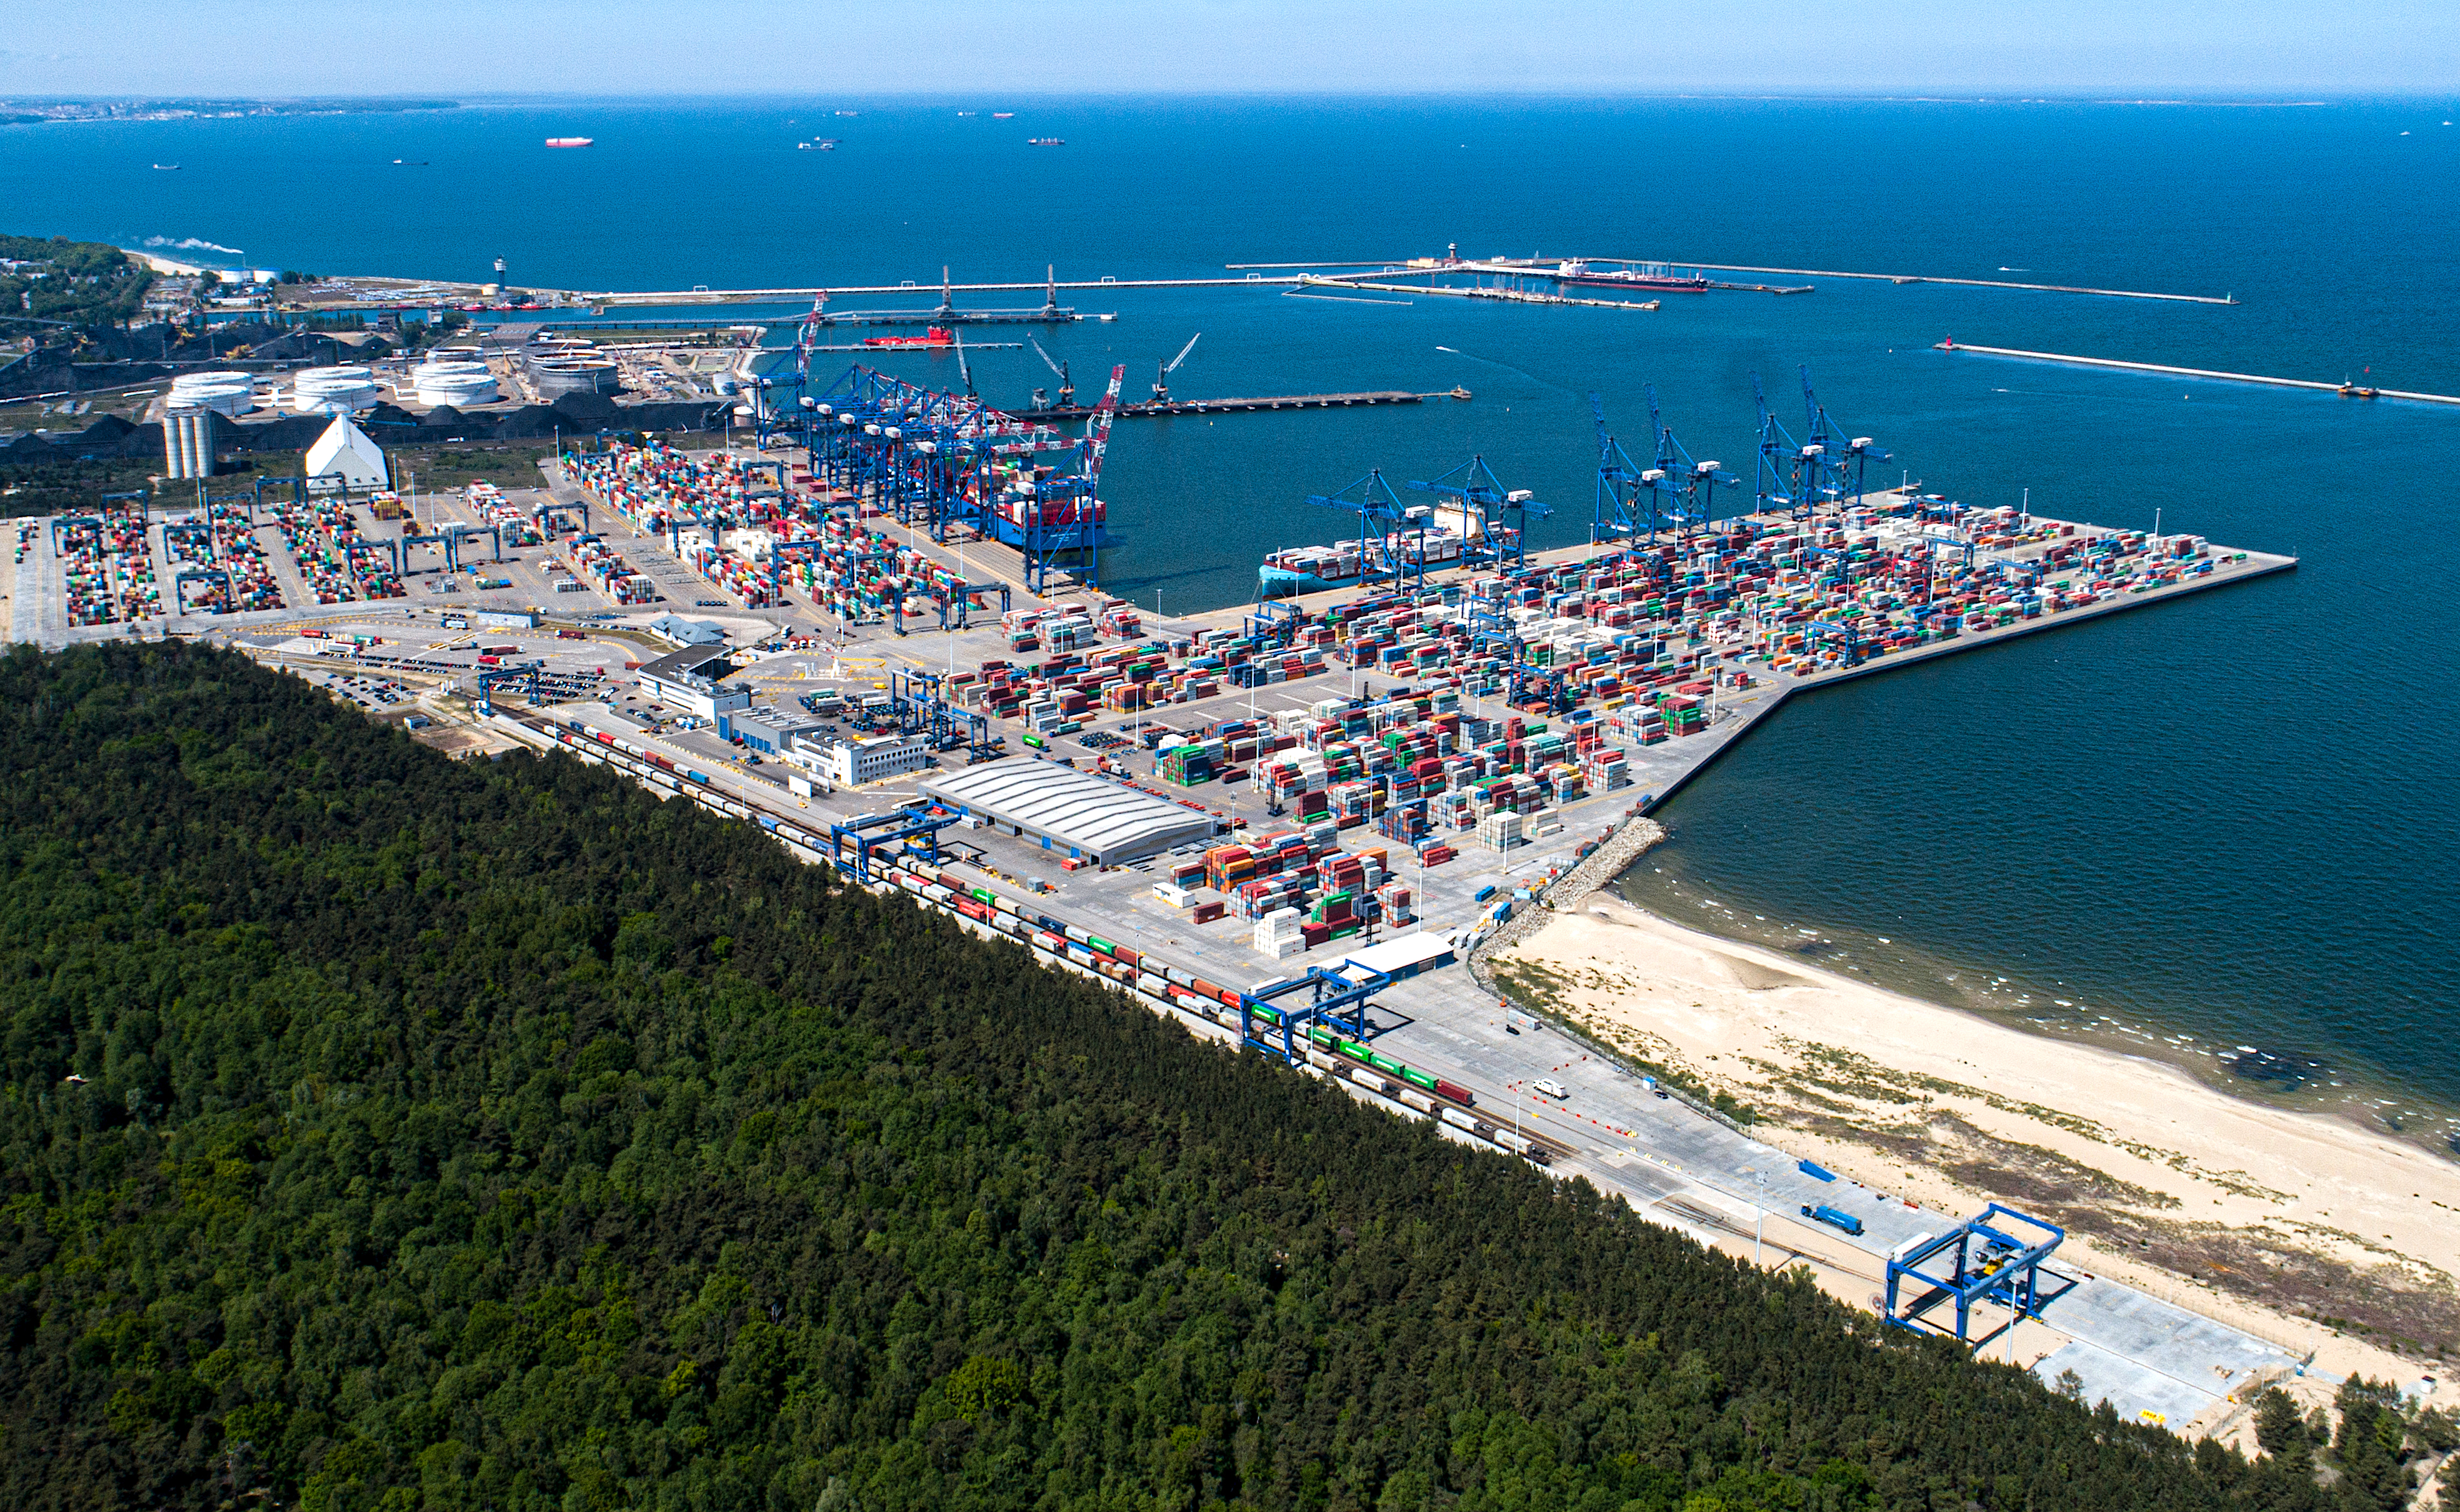 Port of Gdańsk achieves 1st place in the Baltic - MarinePoland.com